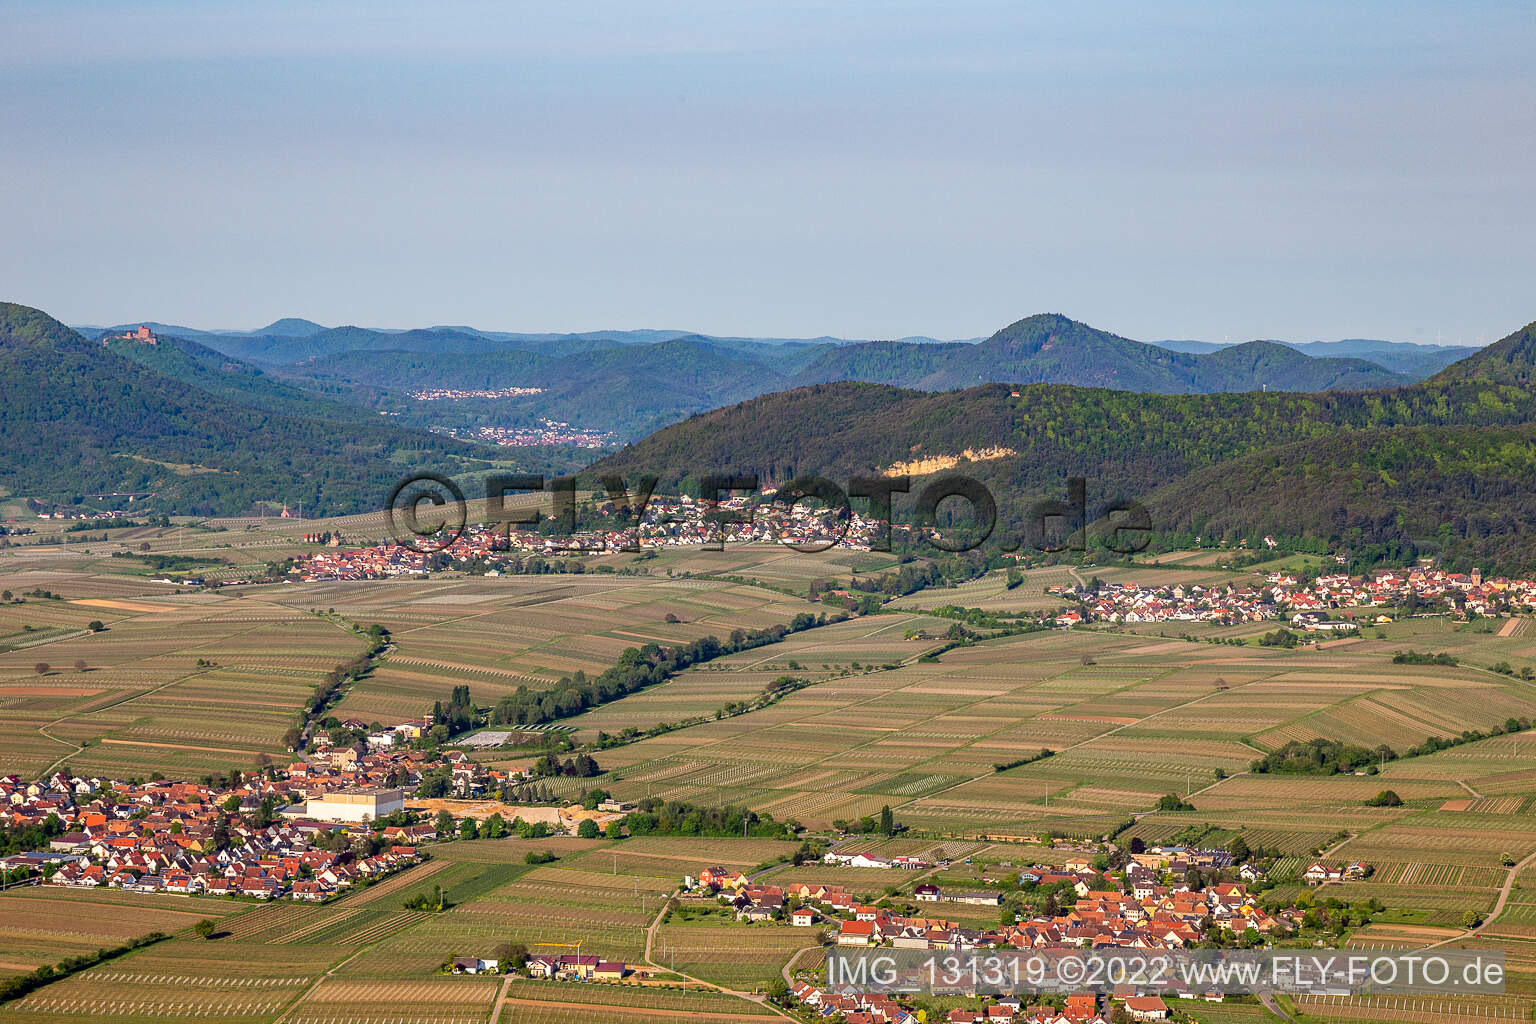 Drone image of Böchingen in the state Rhineland-Palatinate, Germany